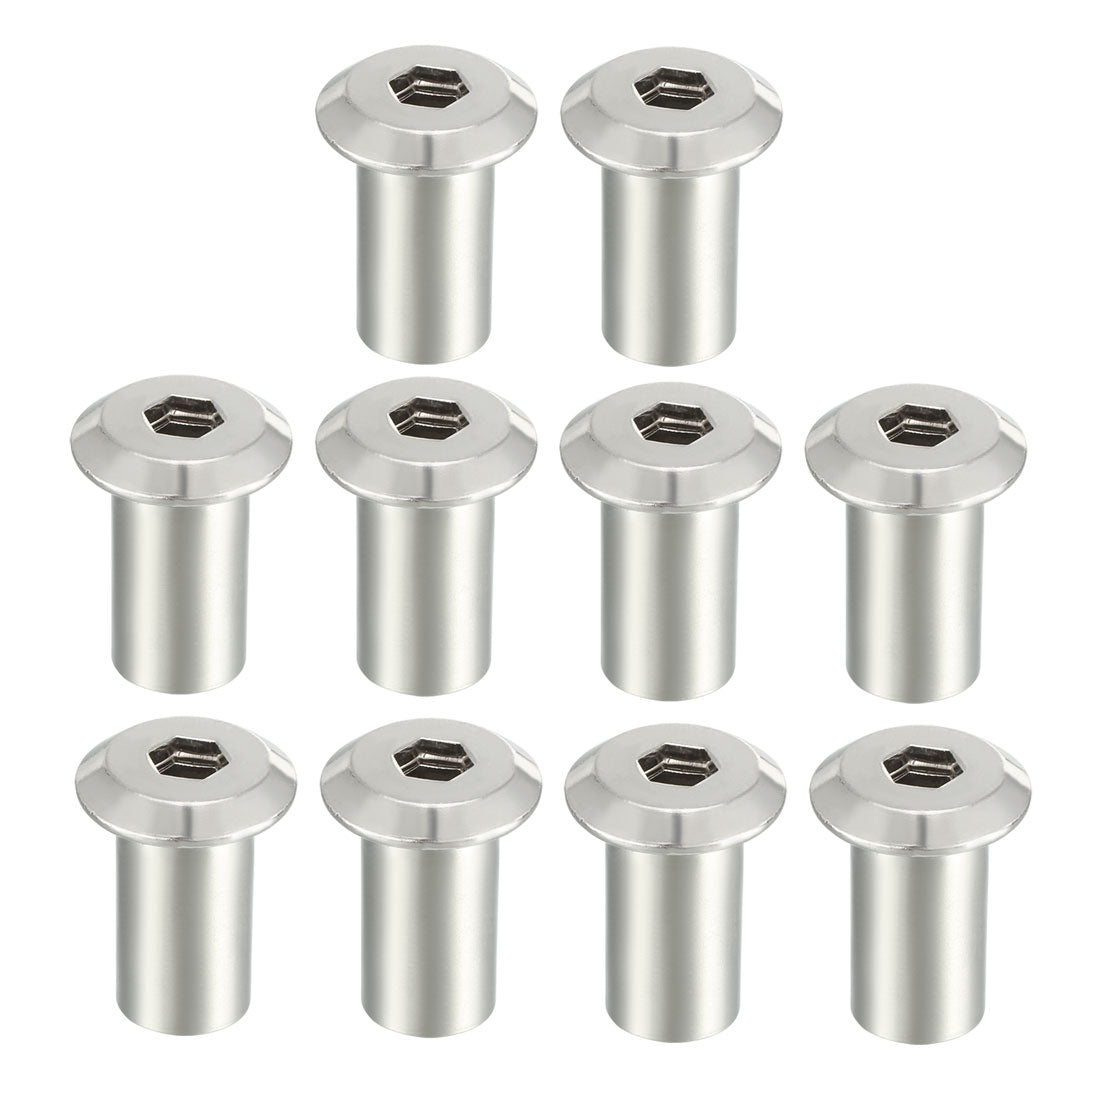 uxcell Uxcell M10x21mm Hex Socket Head Insert Nut Screw Post Sleeve Nut for Furniture 10pcs